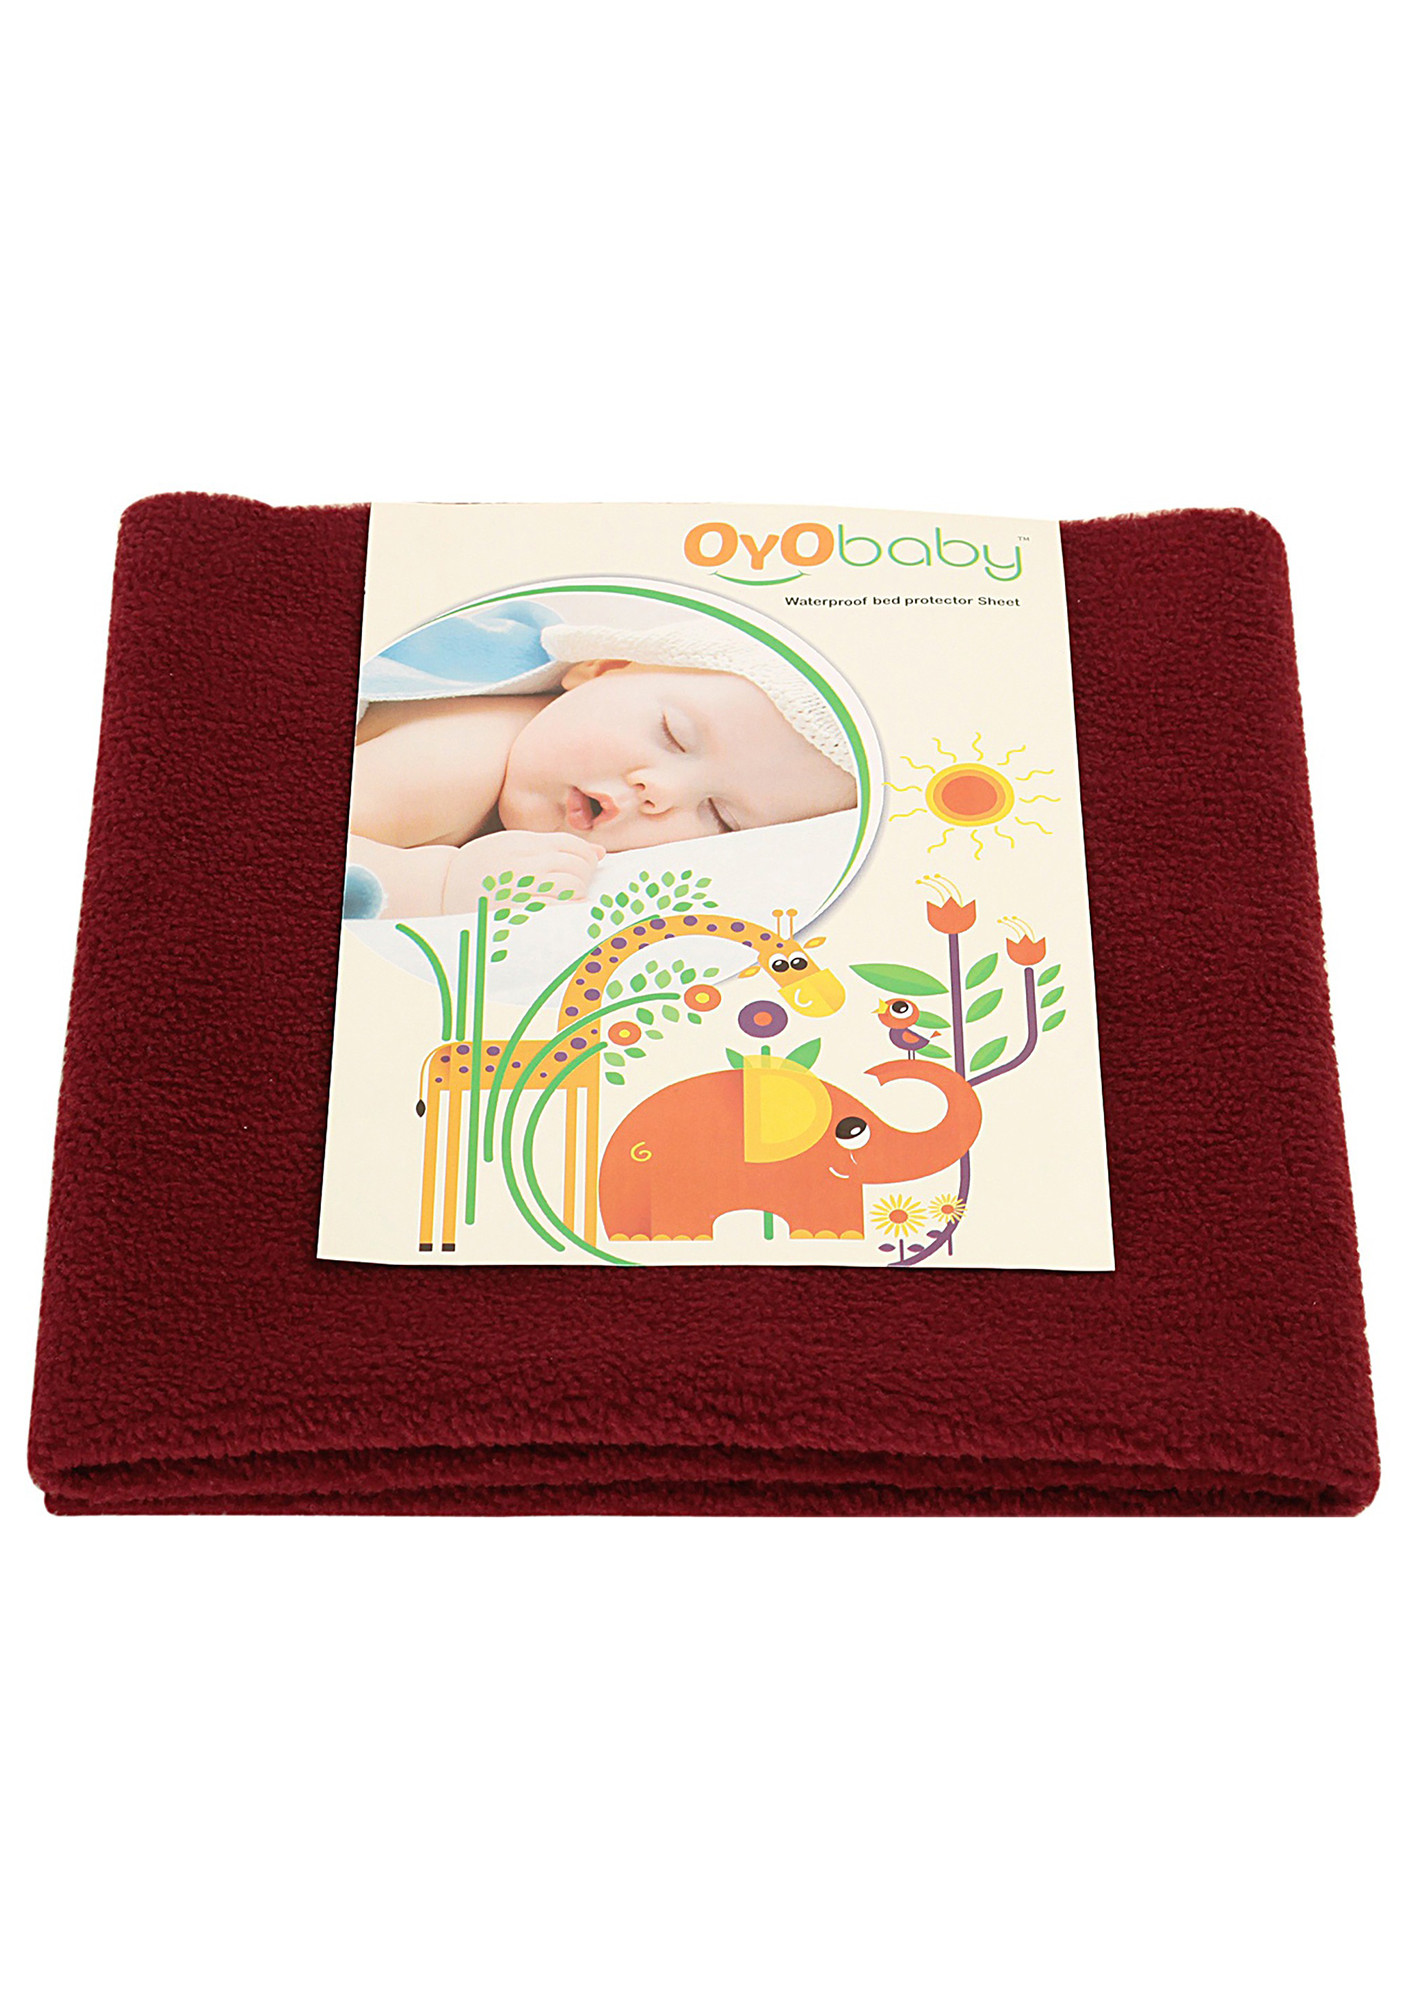 Oyo Baby Cotton Baby Bed Protecting Mat (Maroon, Small)-OB-2020-M